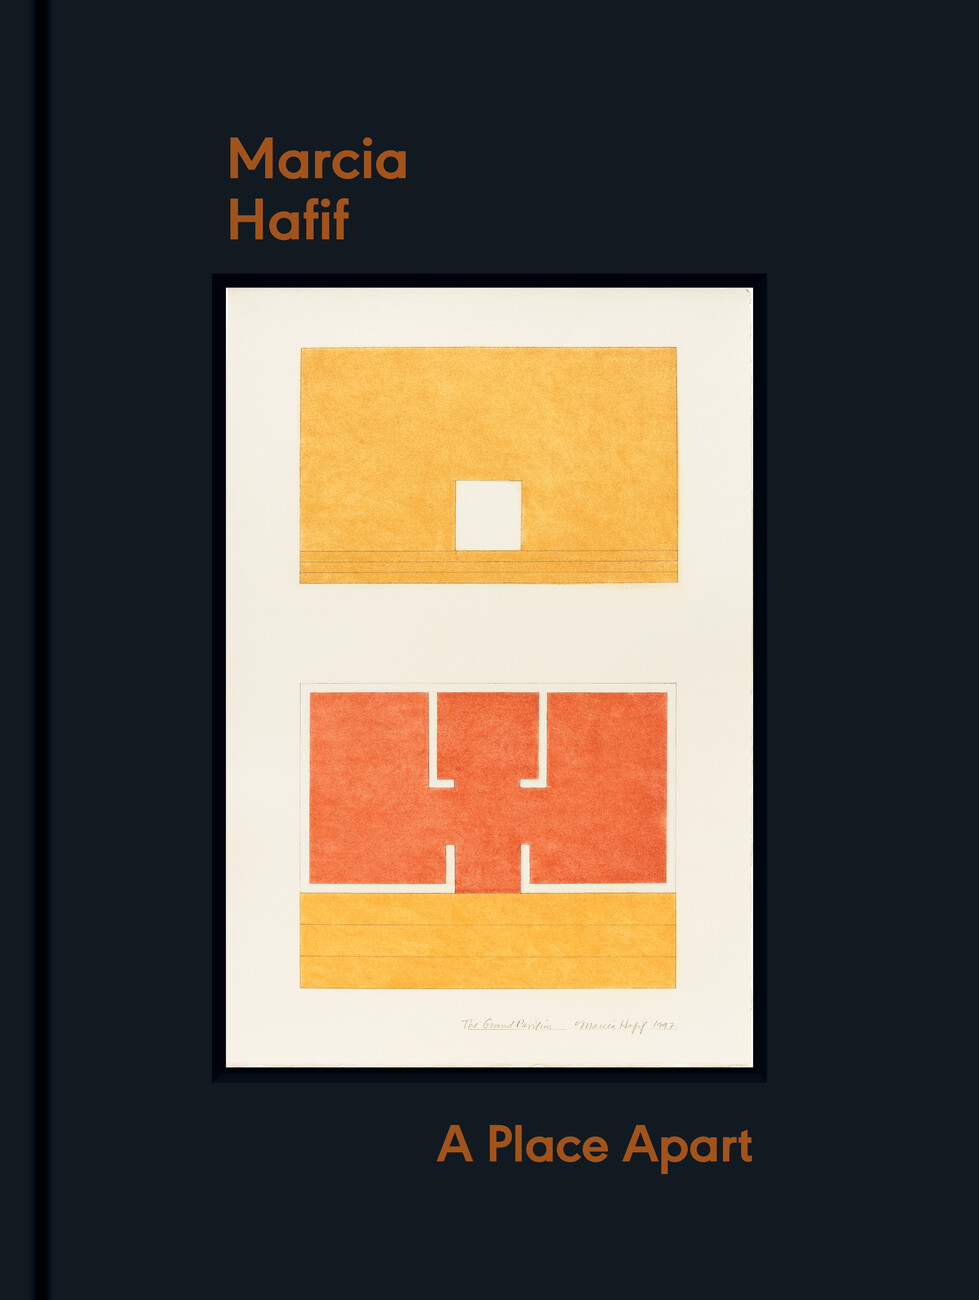 Catalogue cover for Marcia Hafif's exhibition A Place Part blue cover with artwork orange-yellow and orange colored design